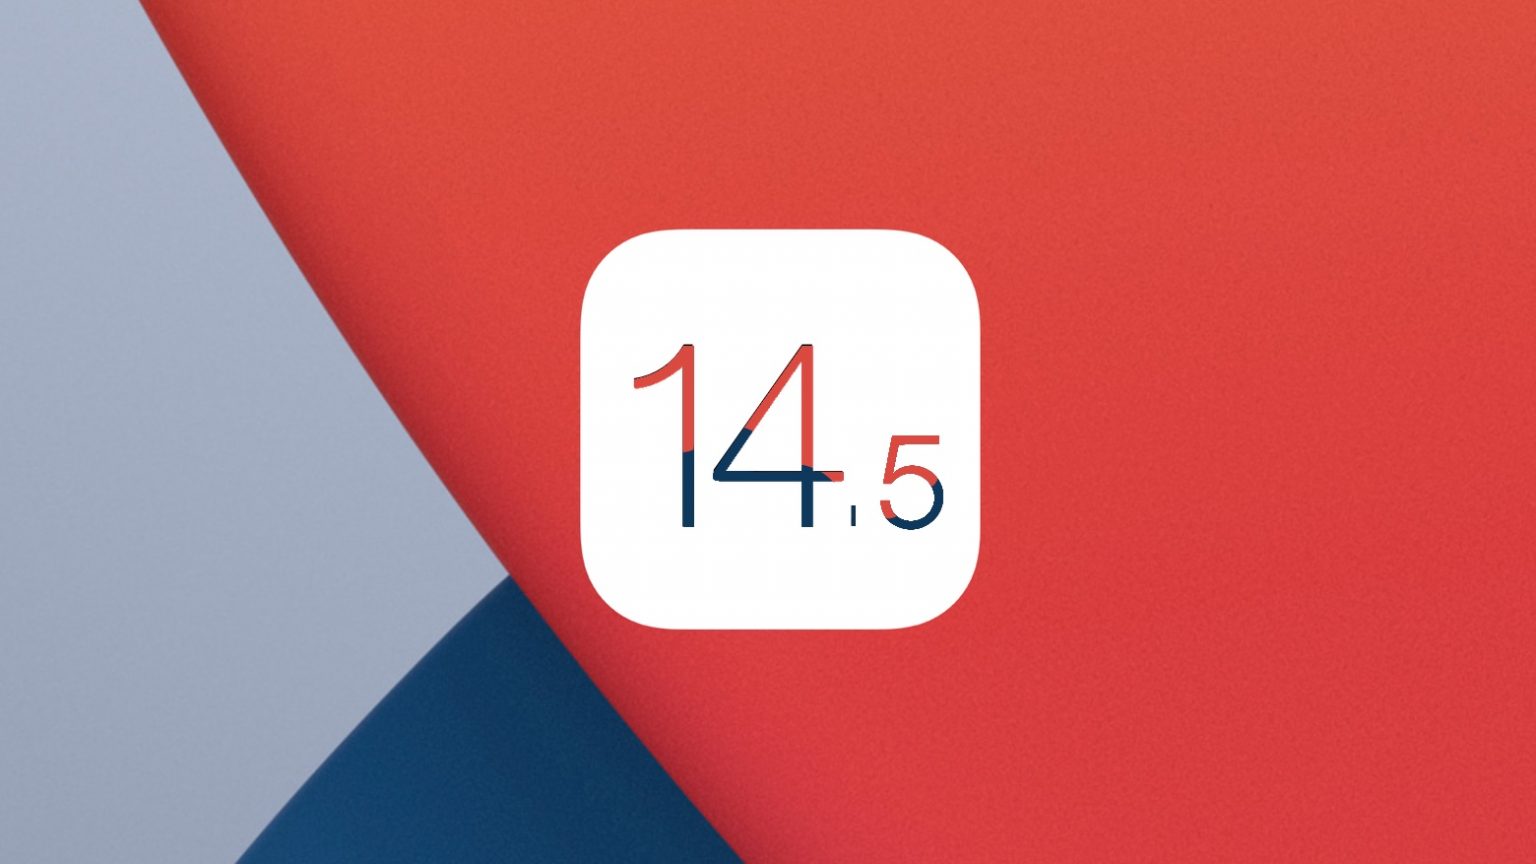 iOS 14.5 will debut before the end of April.